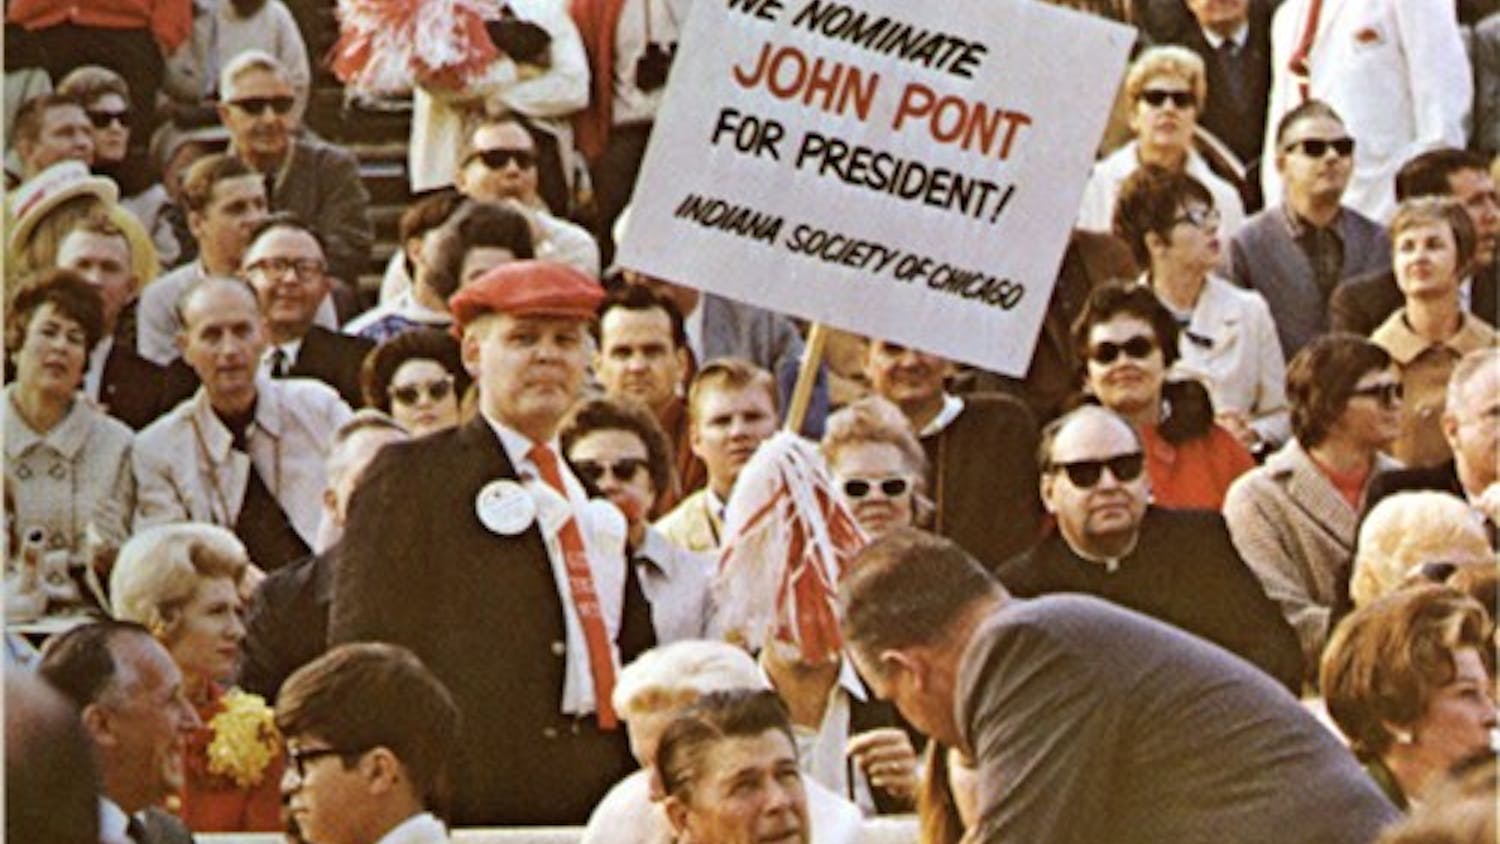 An IU fan holds a sign supporting John Pont behind California Gov. Ronald Reagan during the 1968 Rose Bowl game.
